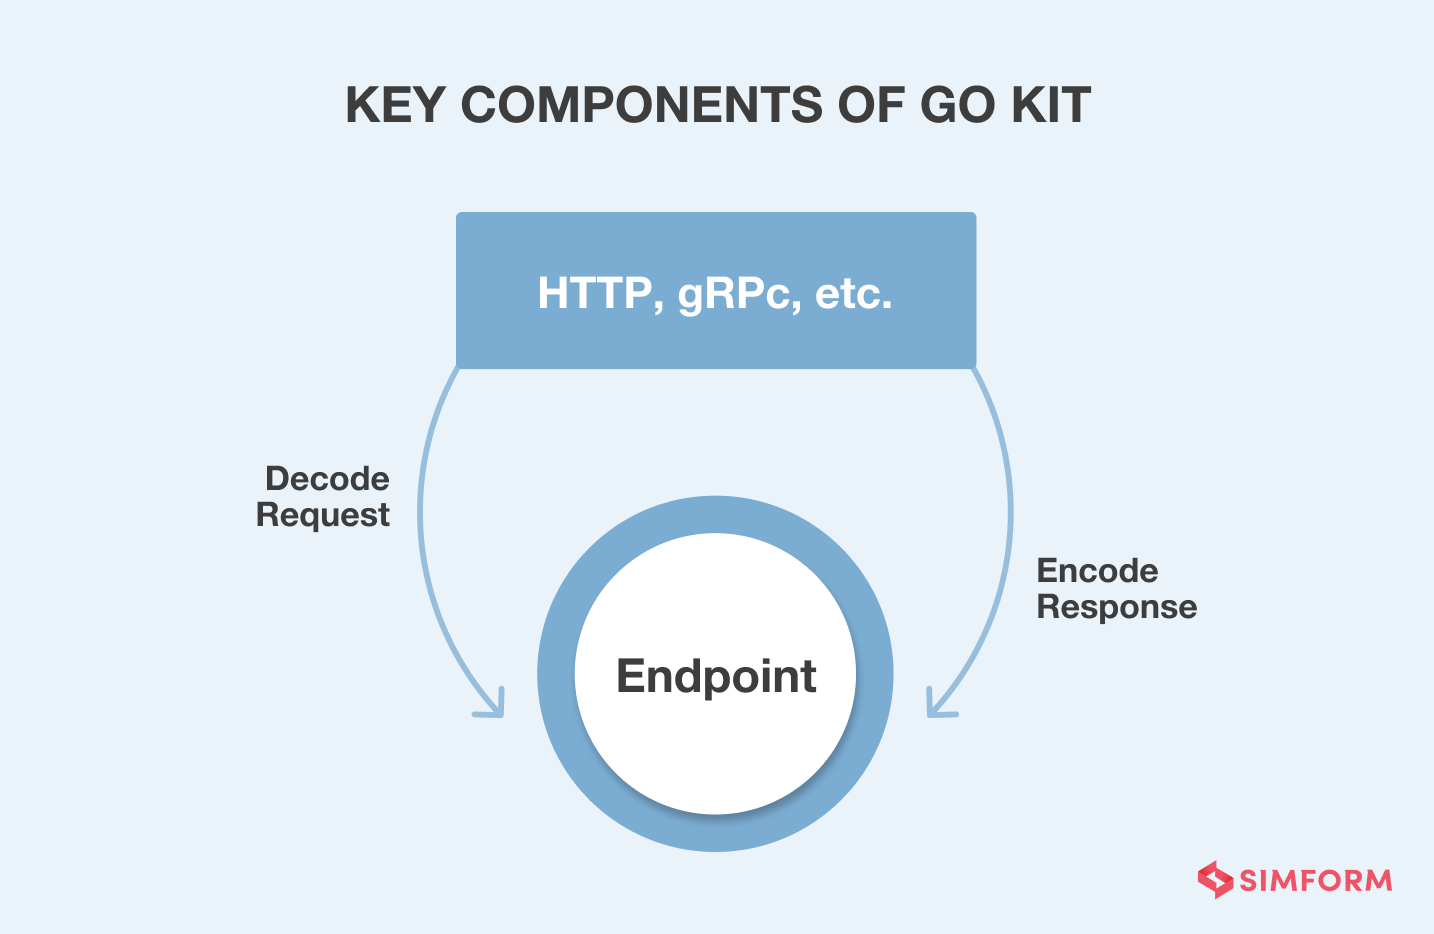 Go Kit Microservices framework components